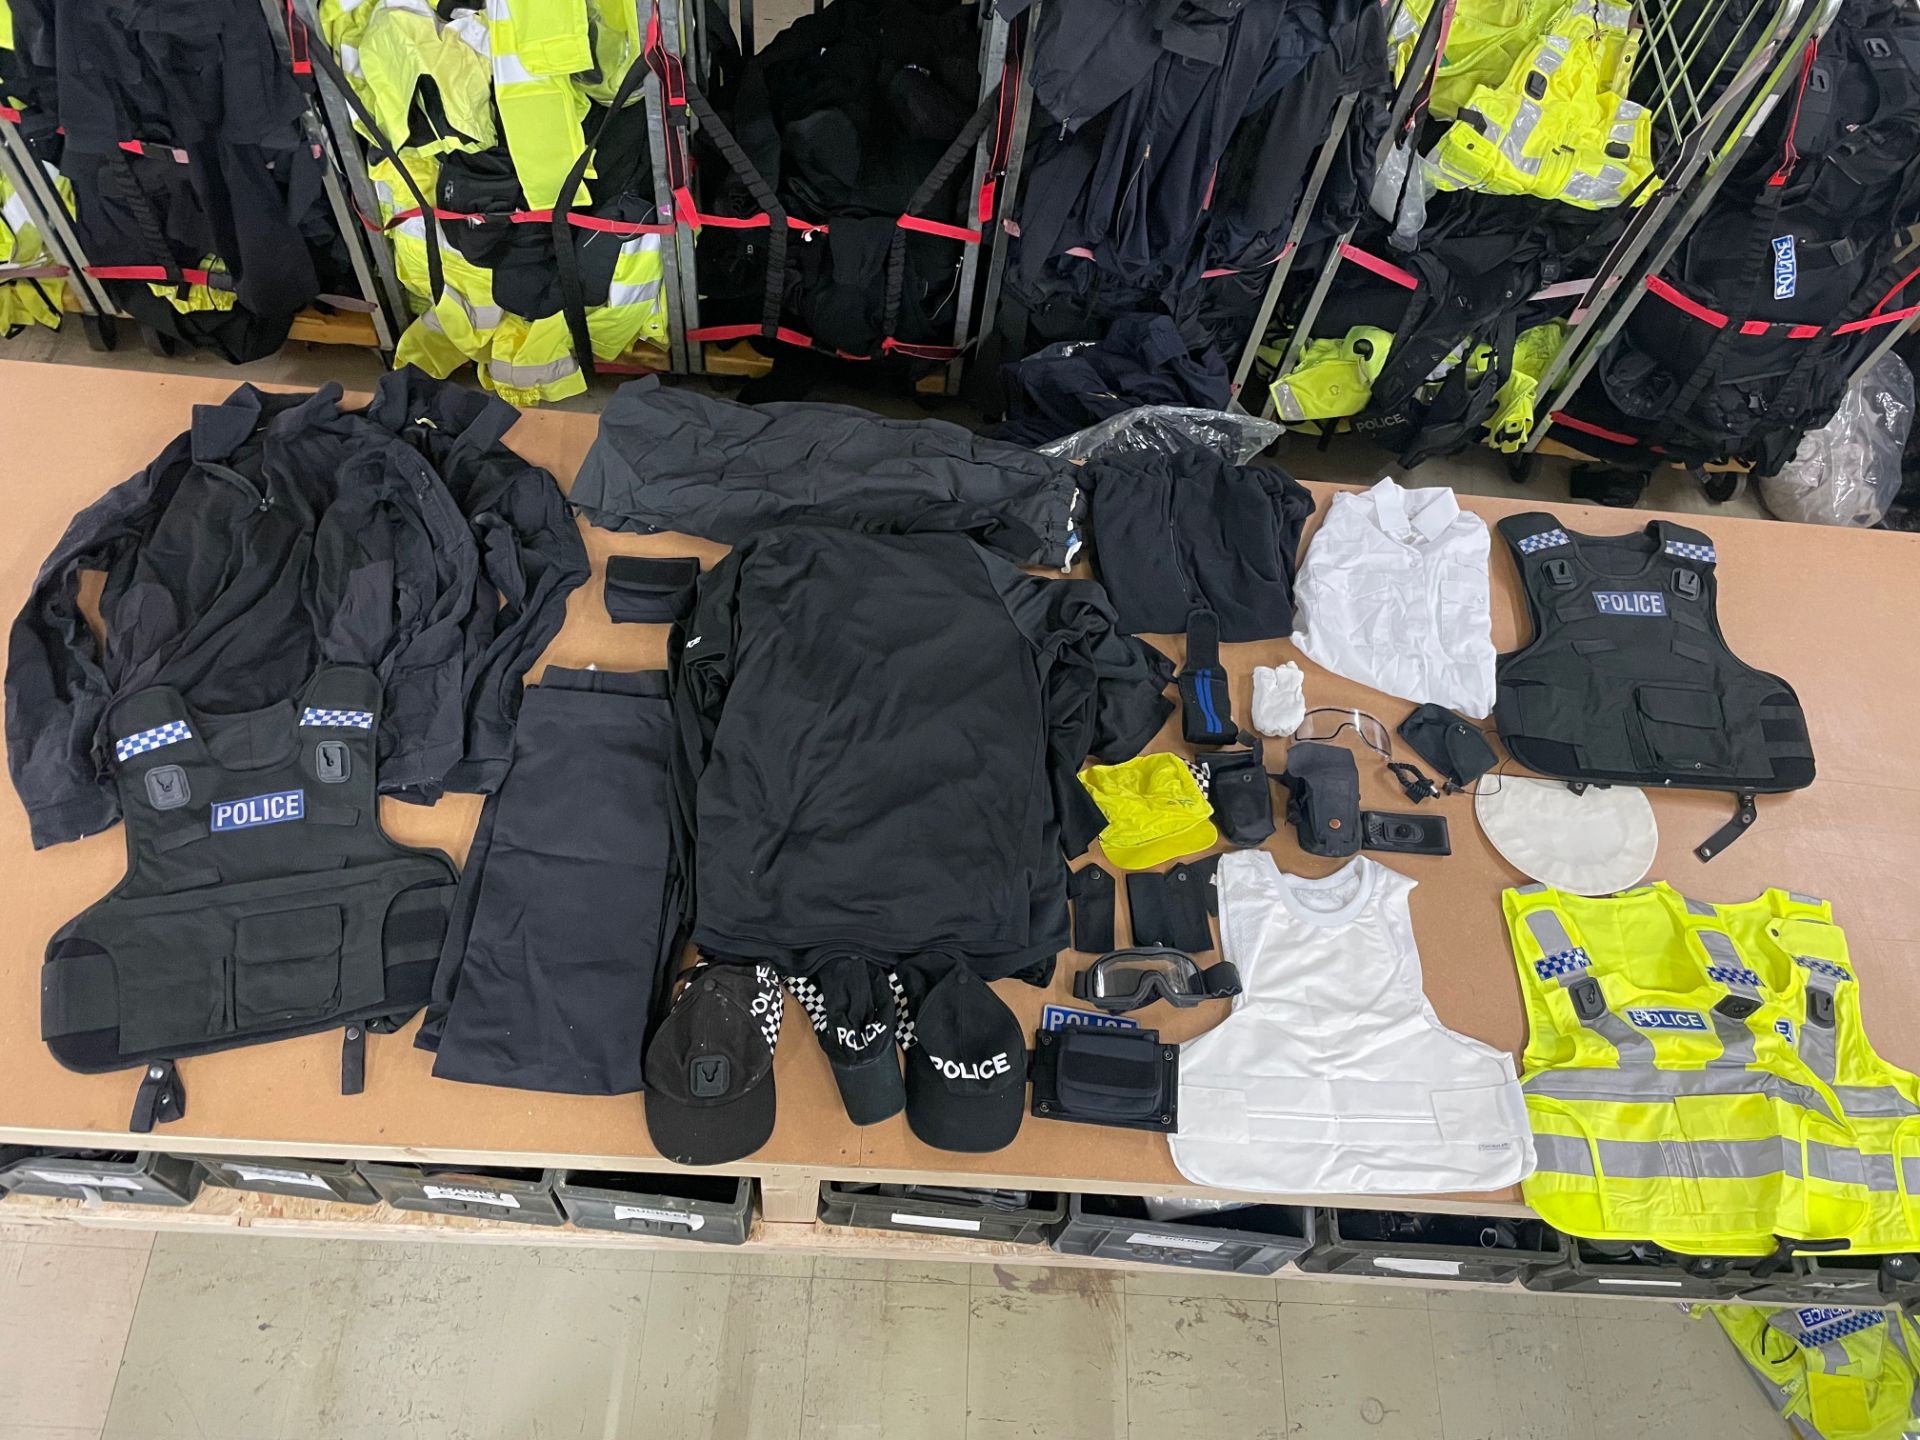 5 X BAGS STUFFED WITH EX POLICE UNIFORM CLOTHING & ACCESSORIES - RRP £1375.00 - NO VAT ON HAMMER - Image 10 of 12